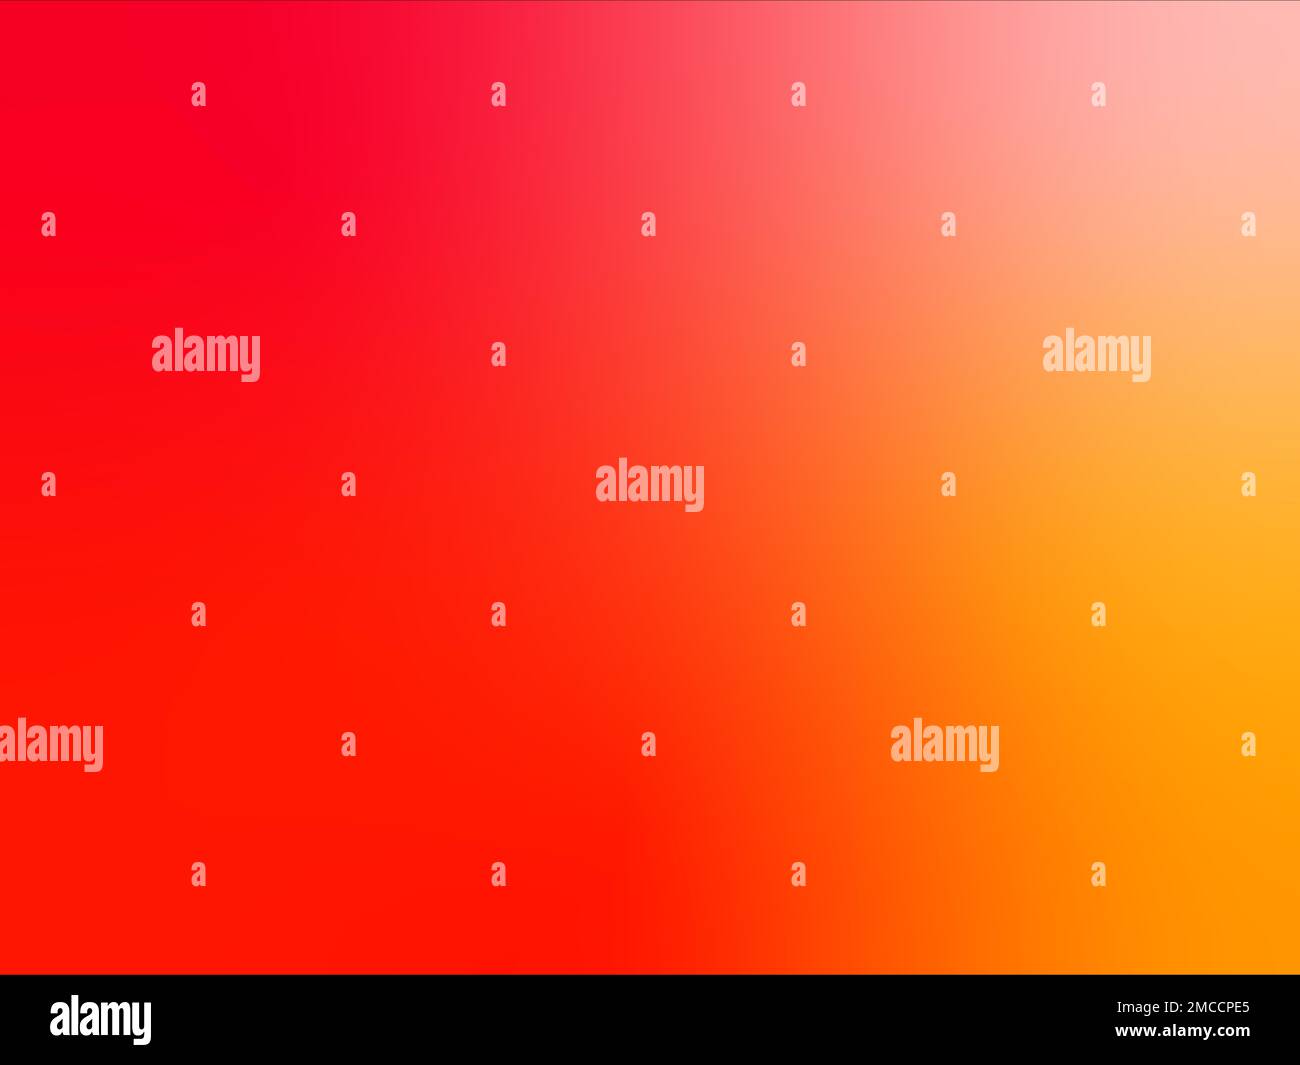 Colour gradient, mesh gradient, abstract background, image, bright, colours, red, orange, illustration Stock Photo